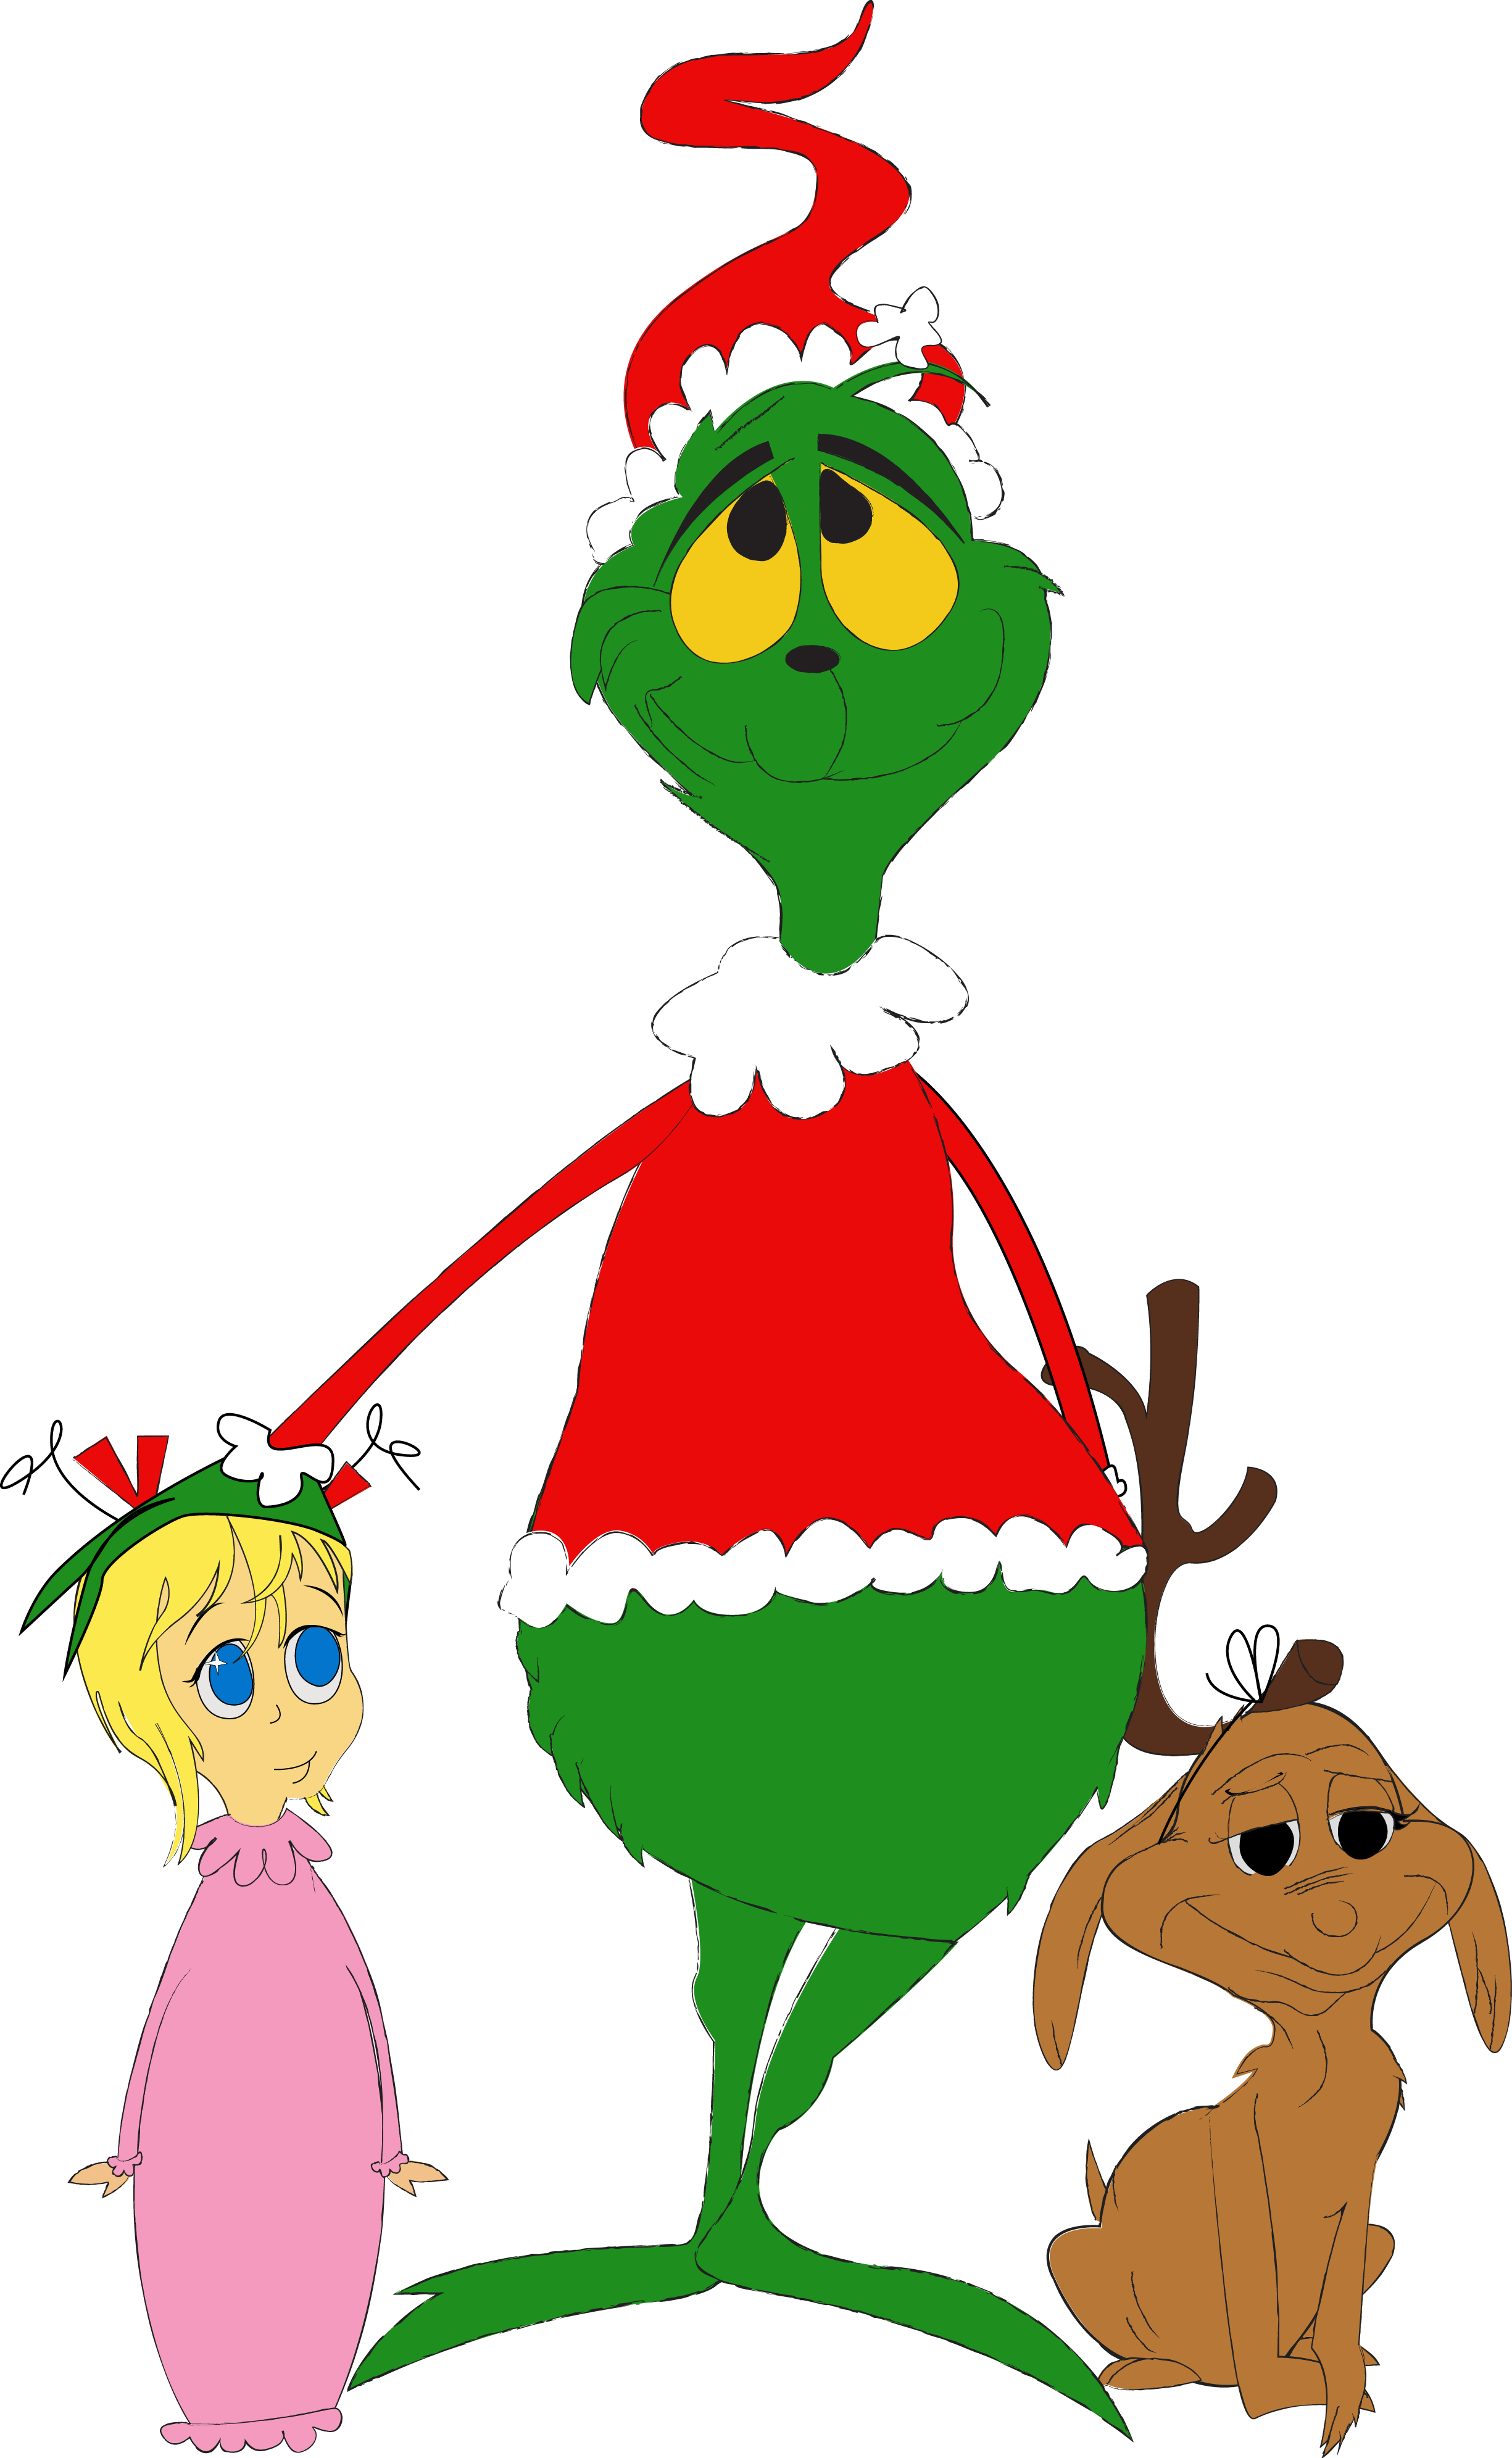 The Grinch PNG Image File